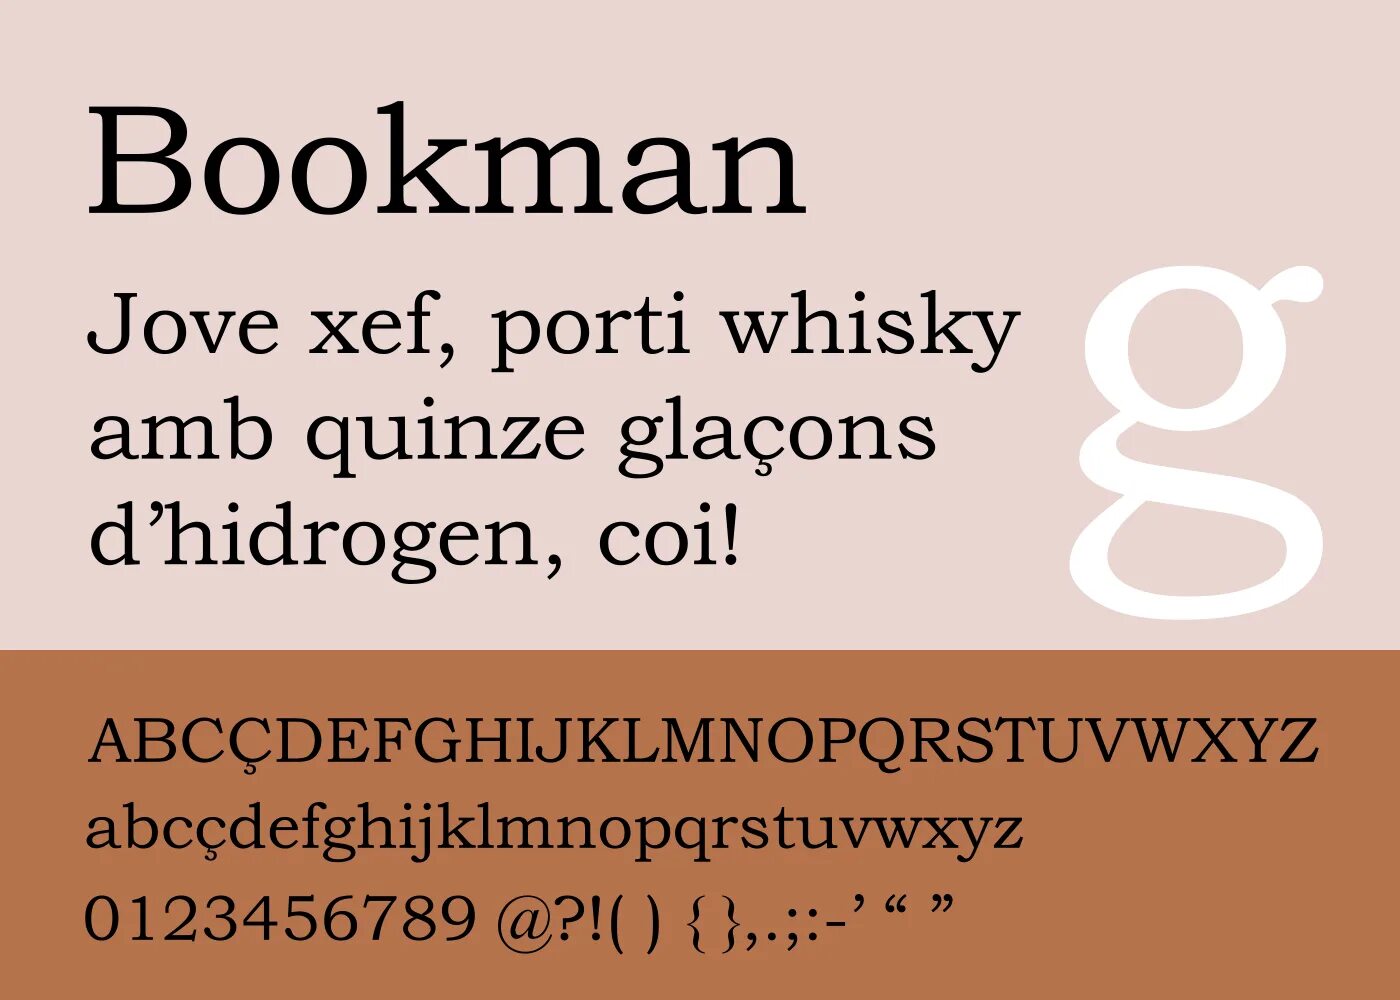 Шрифт bookman old. Bookman. Monotype Bookman old. Bookman old Style. Букмэн.